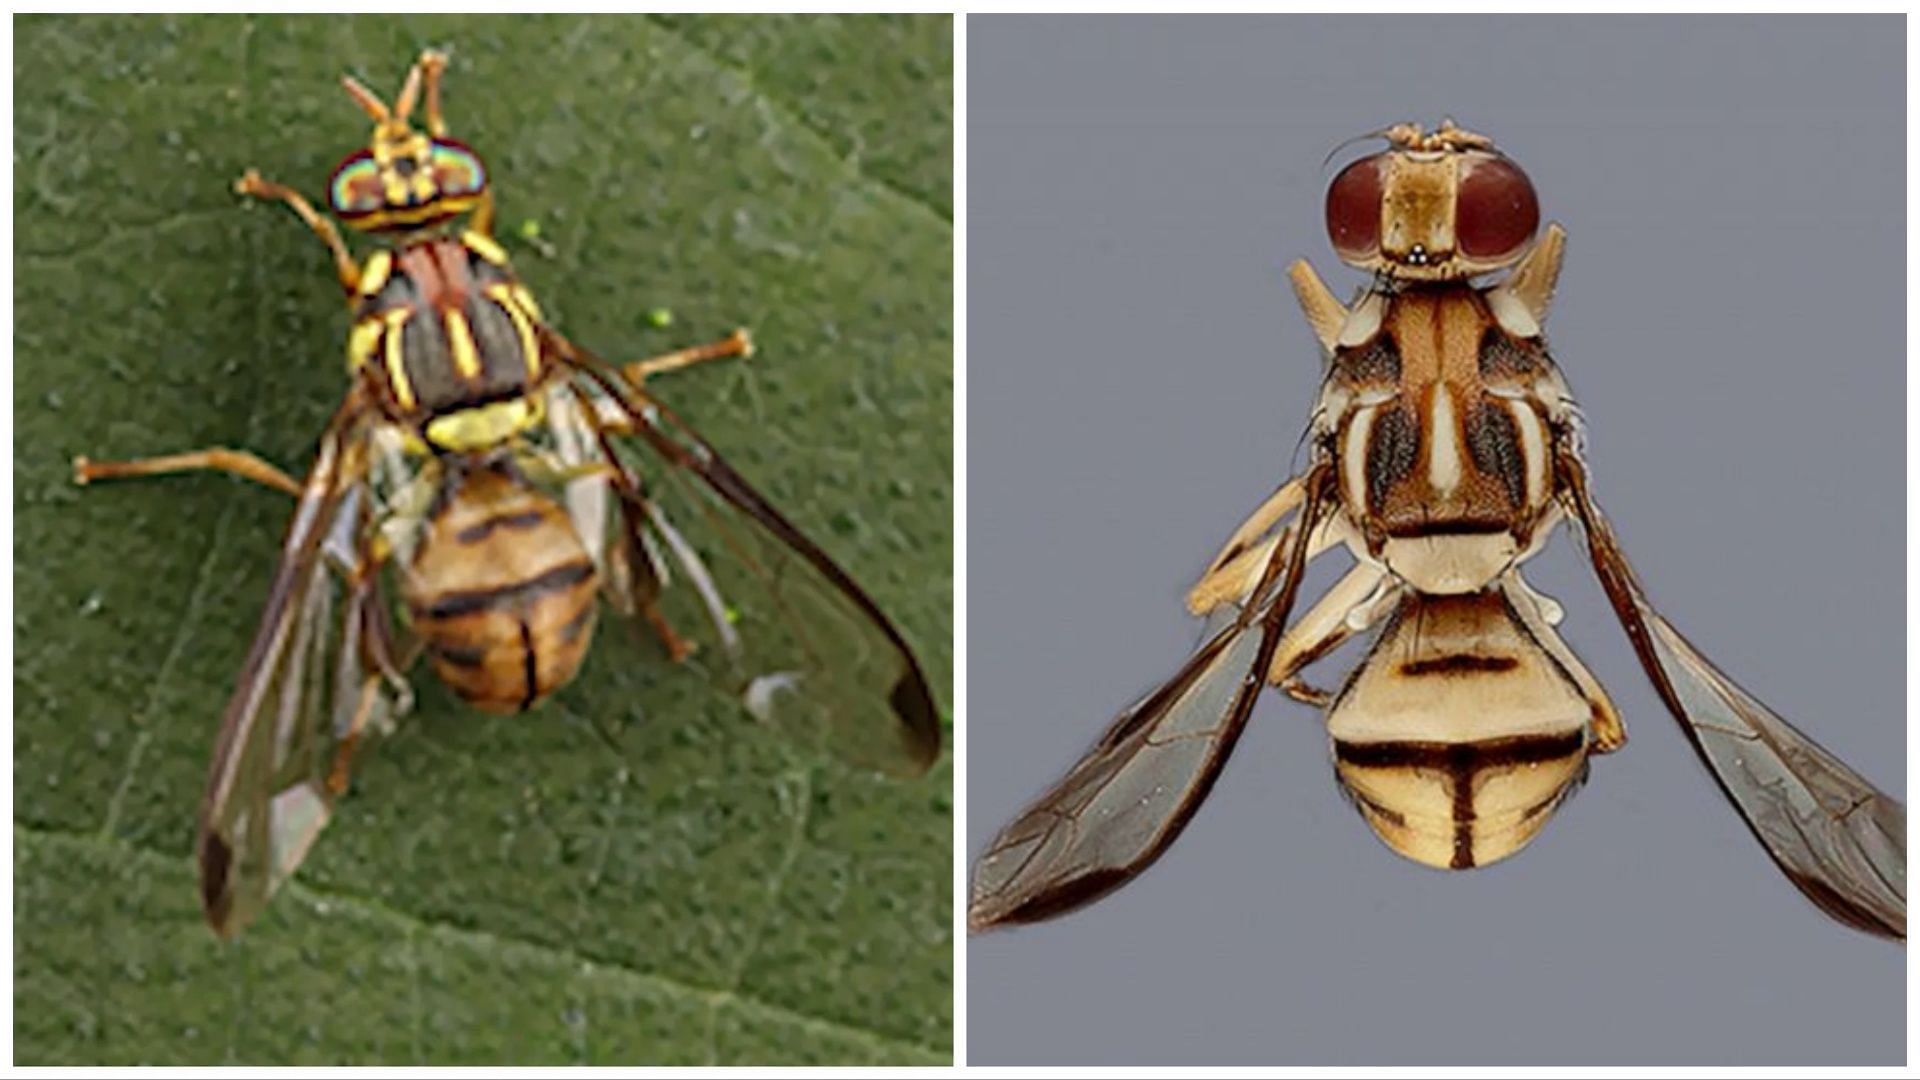 Tau fruit flies are wreaking havoc (Image via California Department of Food and Agriculture)